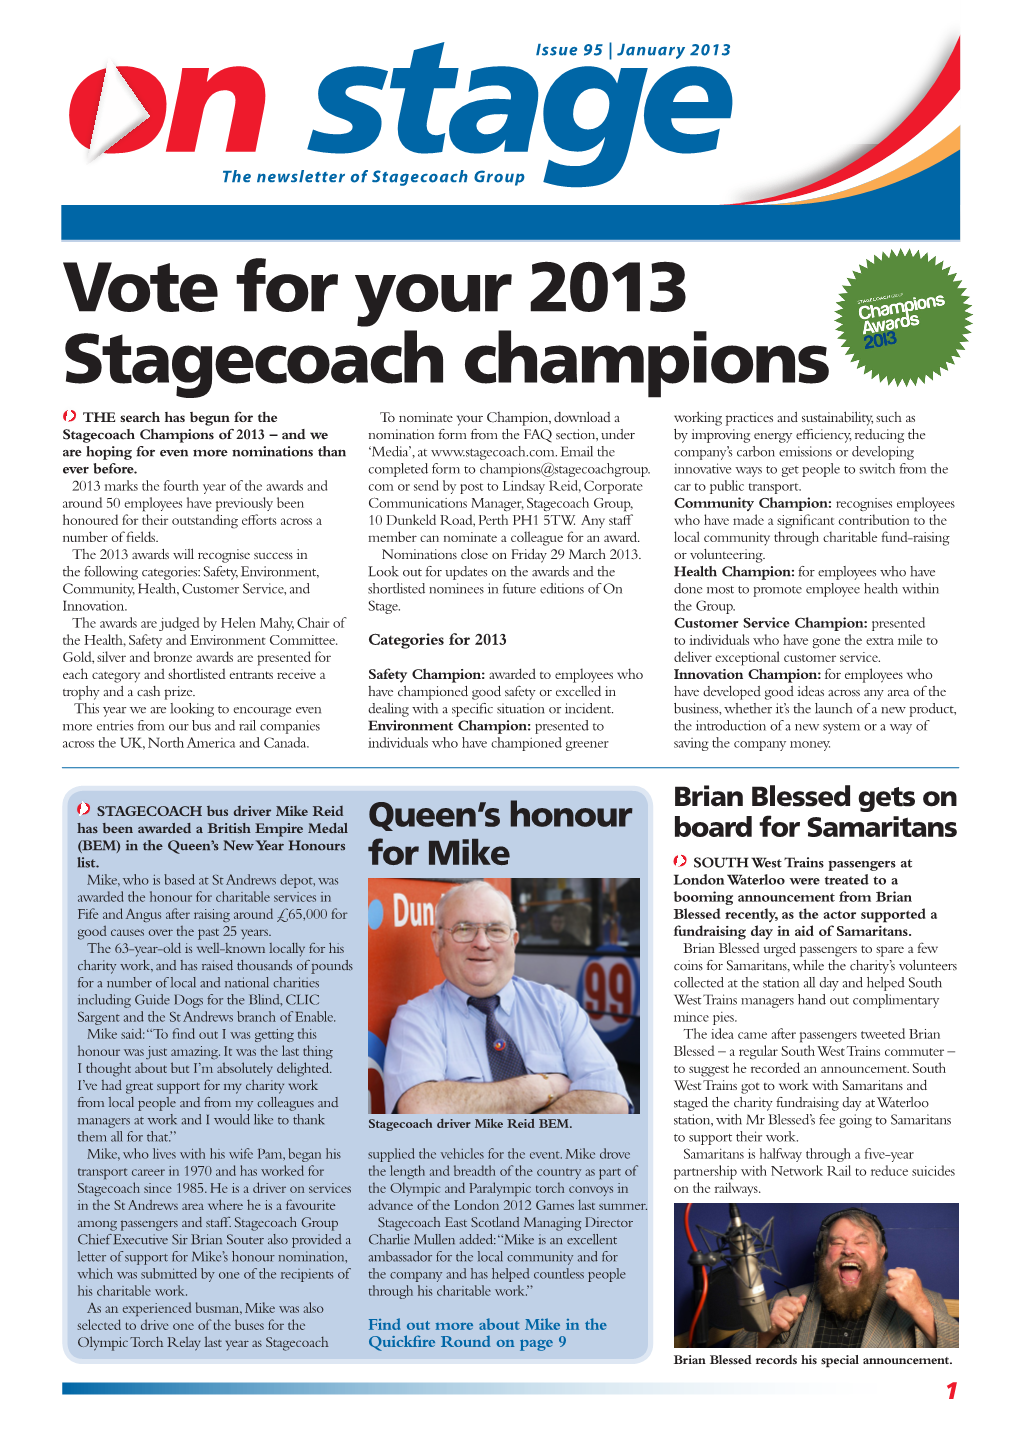 Vote for Your 2013 Stagecoach Champions